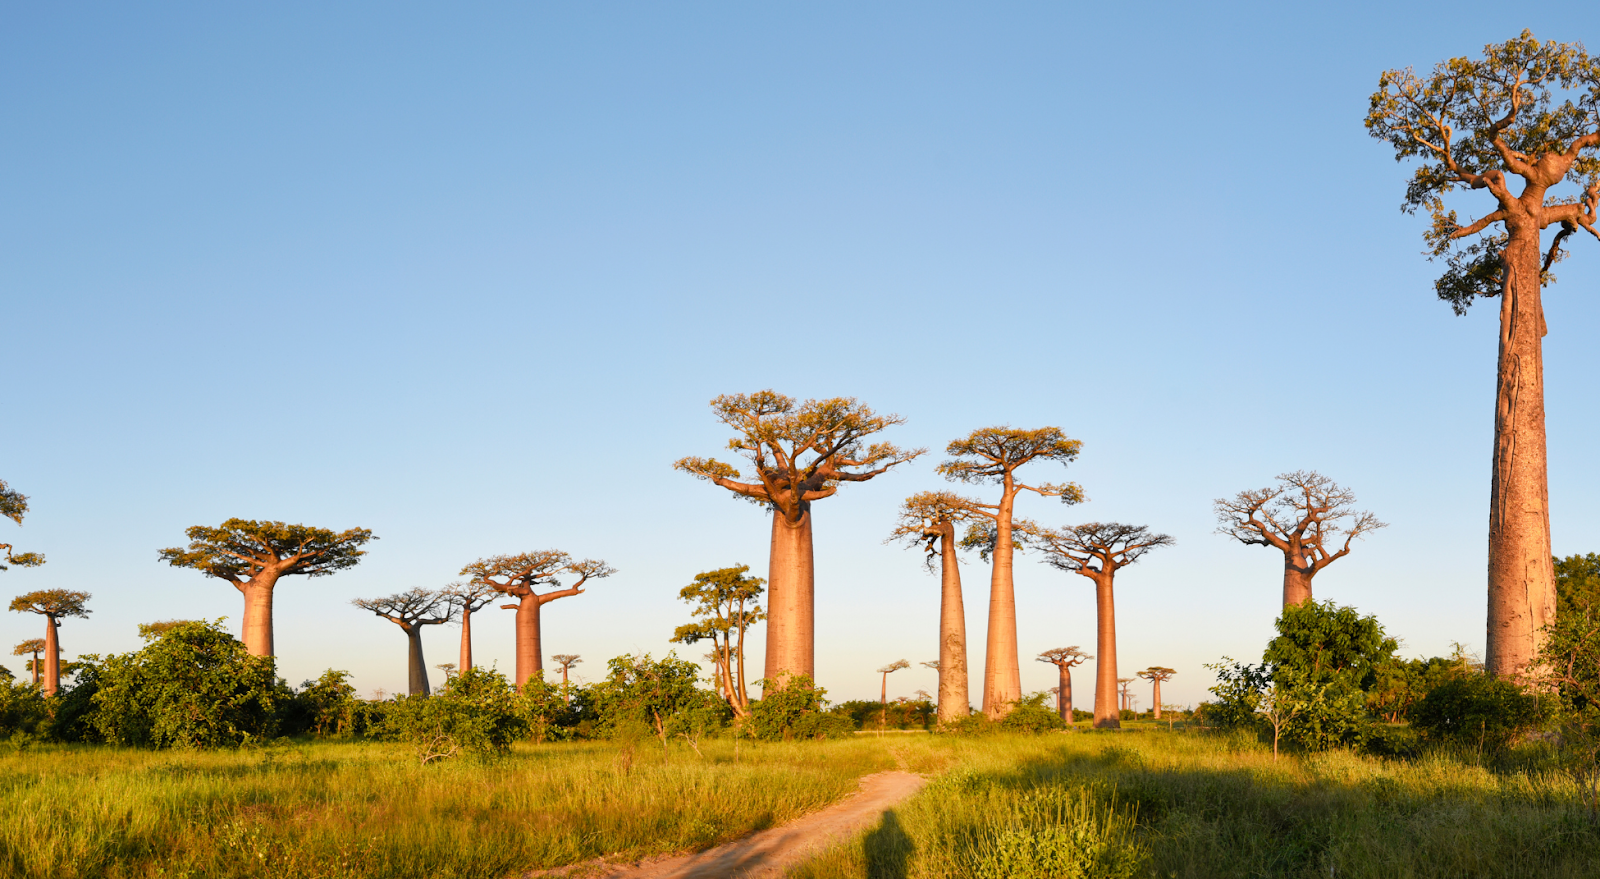 A to Z Bucket List - Avenue of the Baobabs